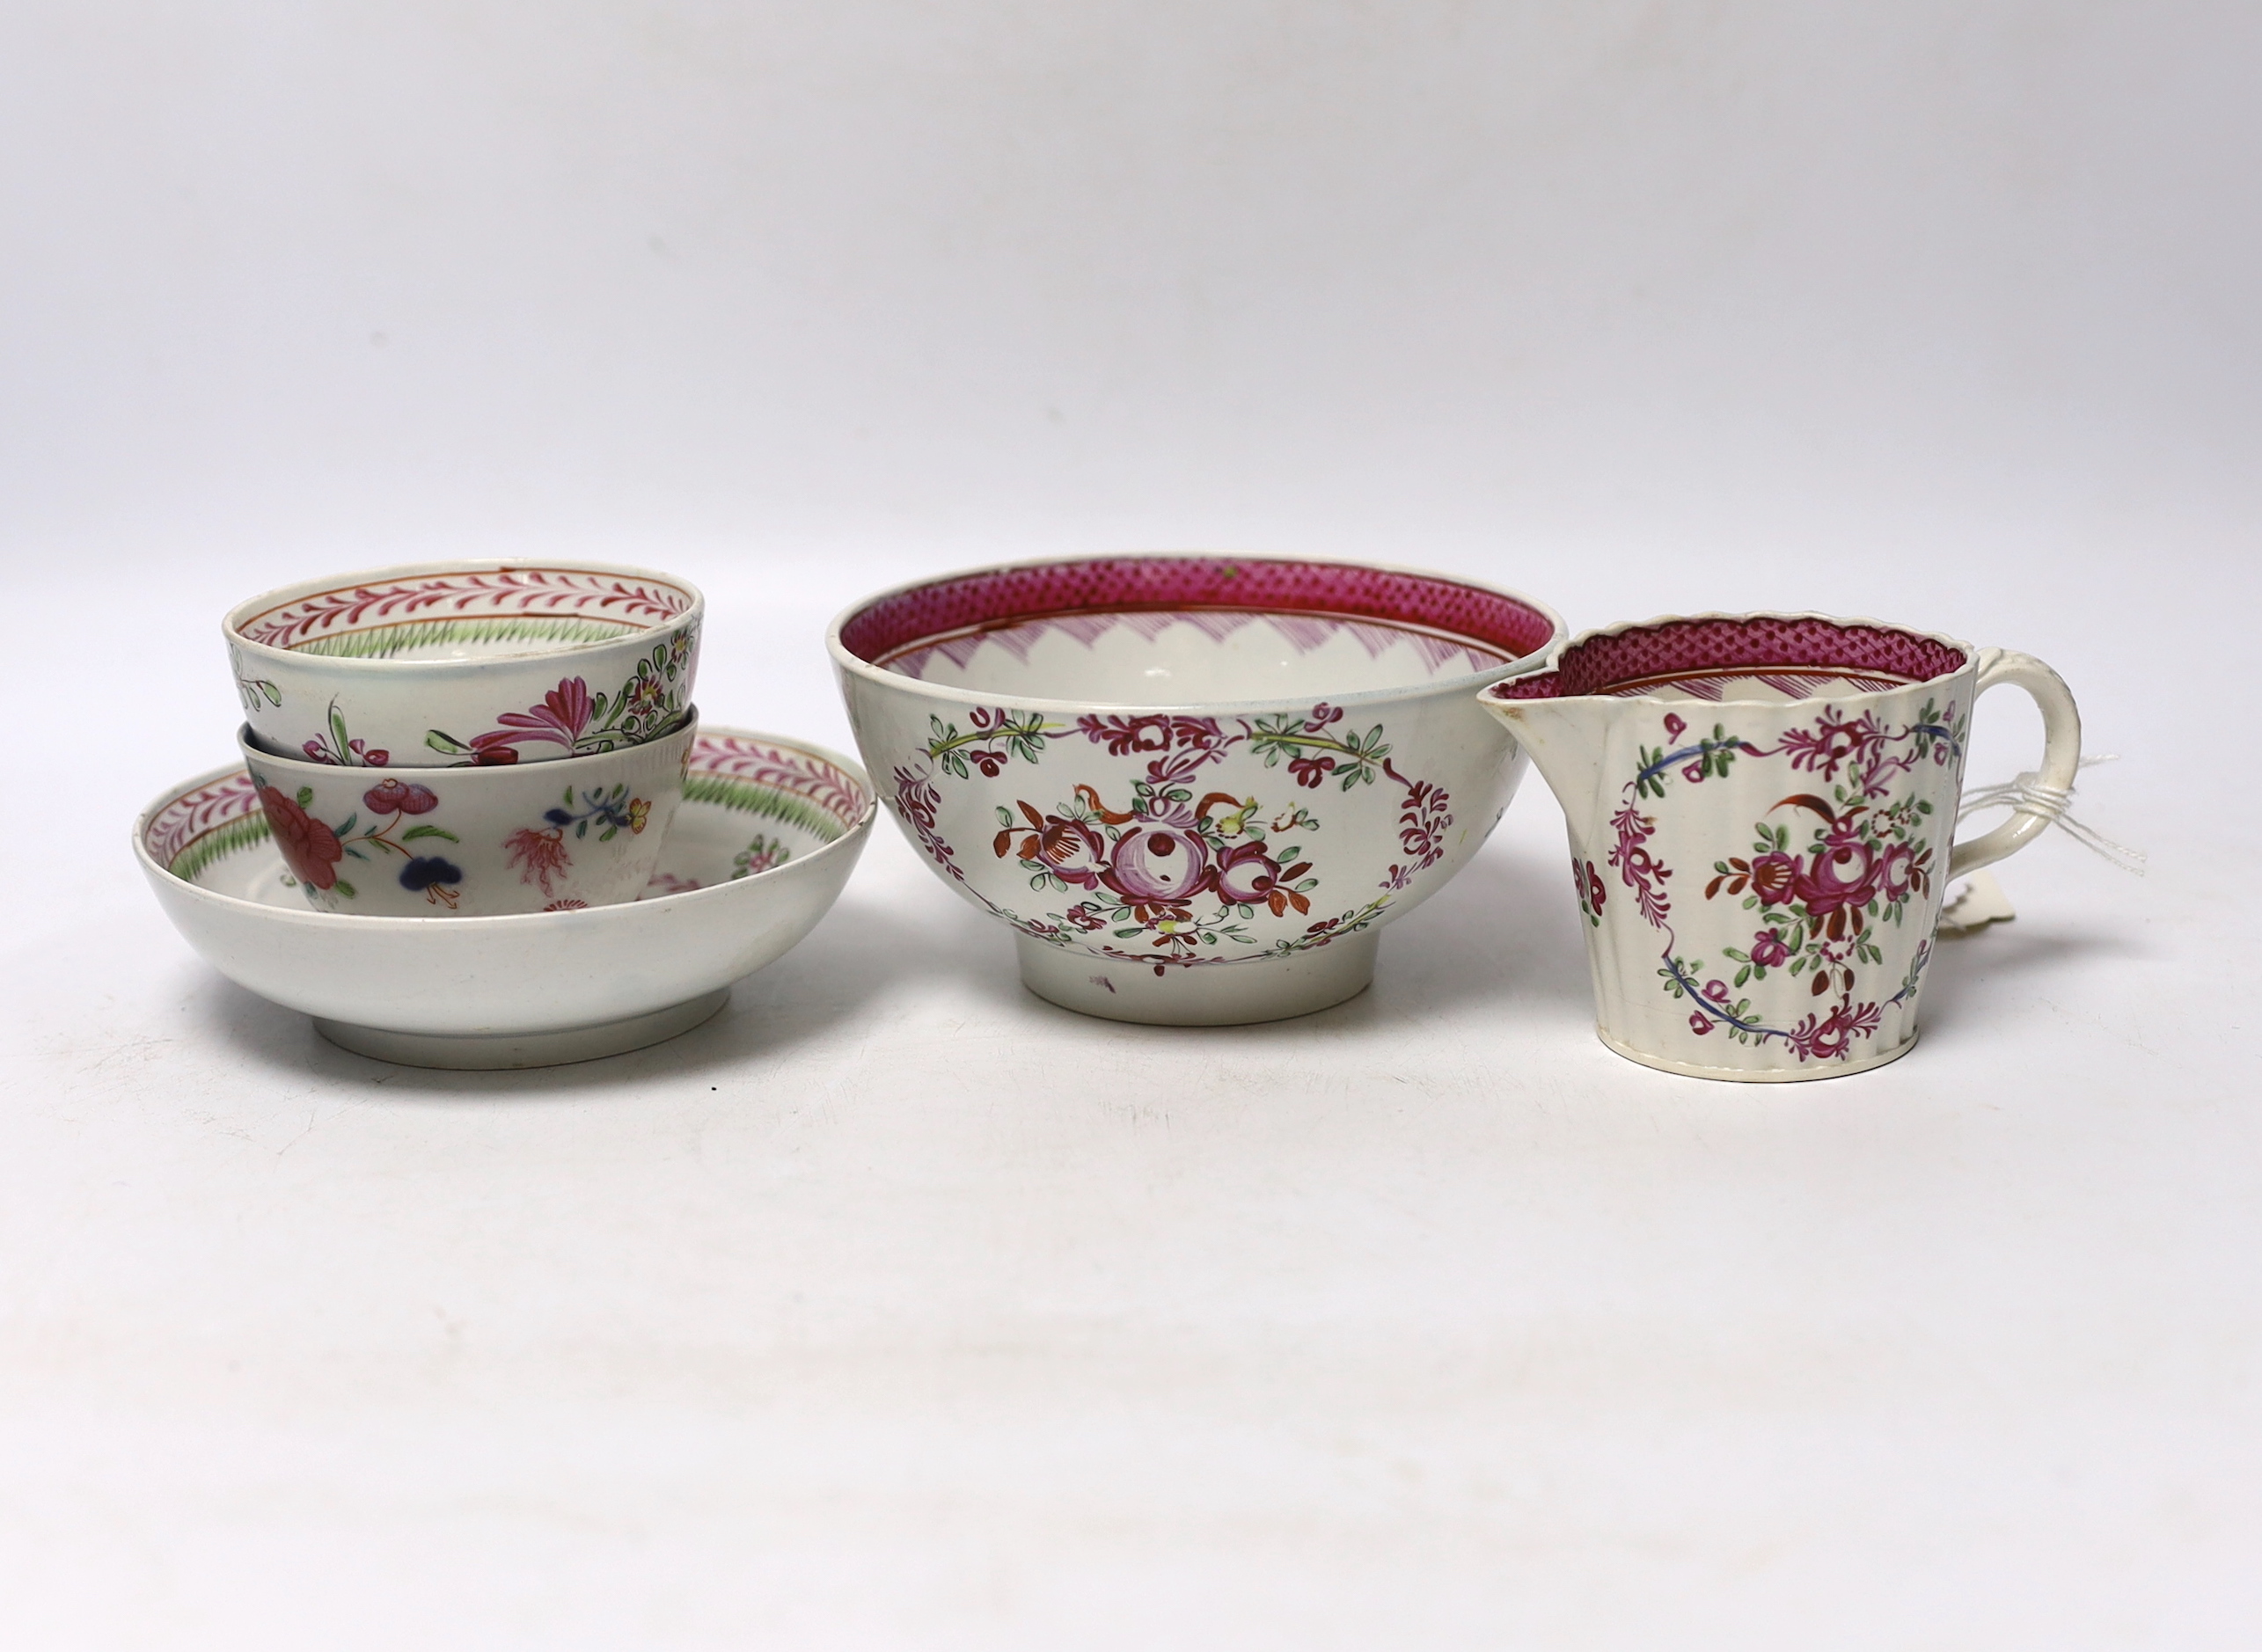 Late 18th/early 19th century pearlware small jug, sugar bowl and a cream jug, 6.5cm high and a late 18th century Chinese export teabowl